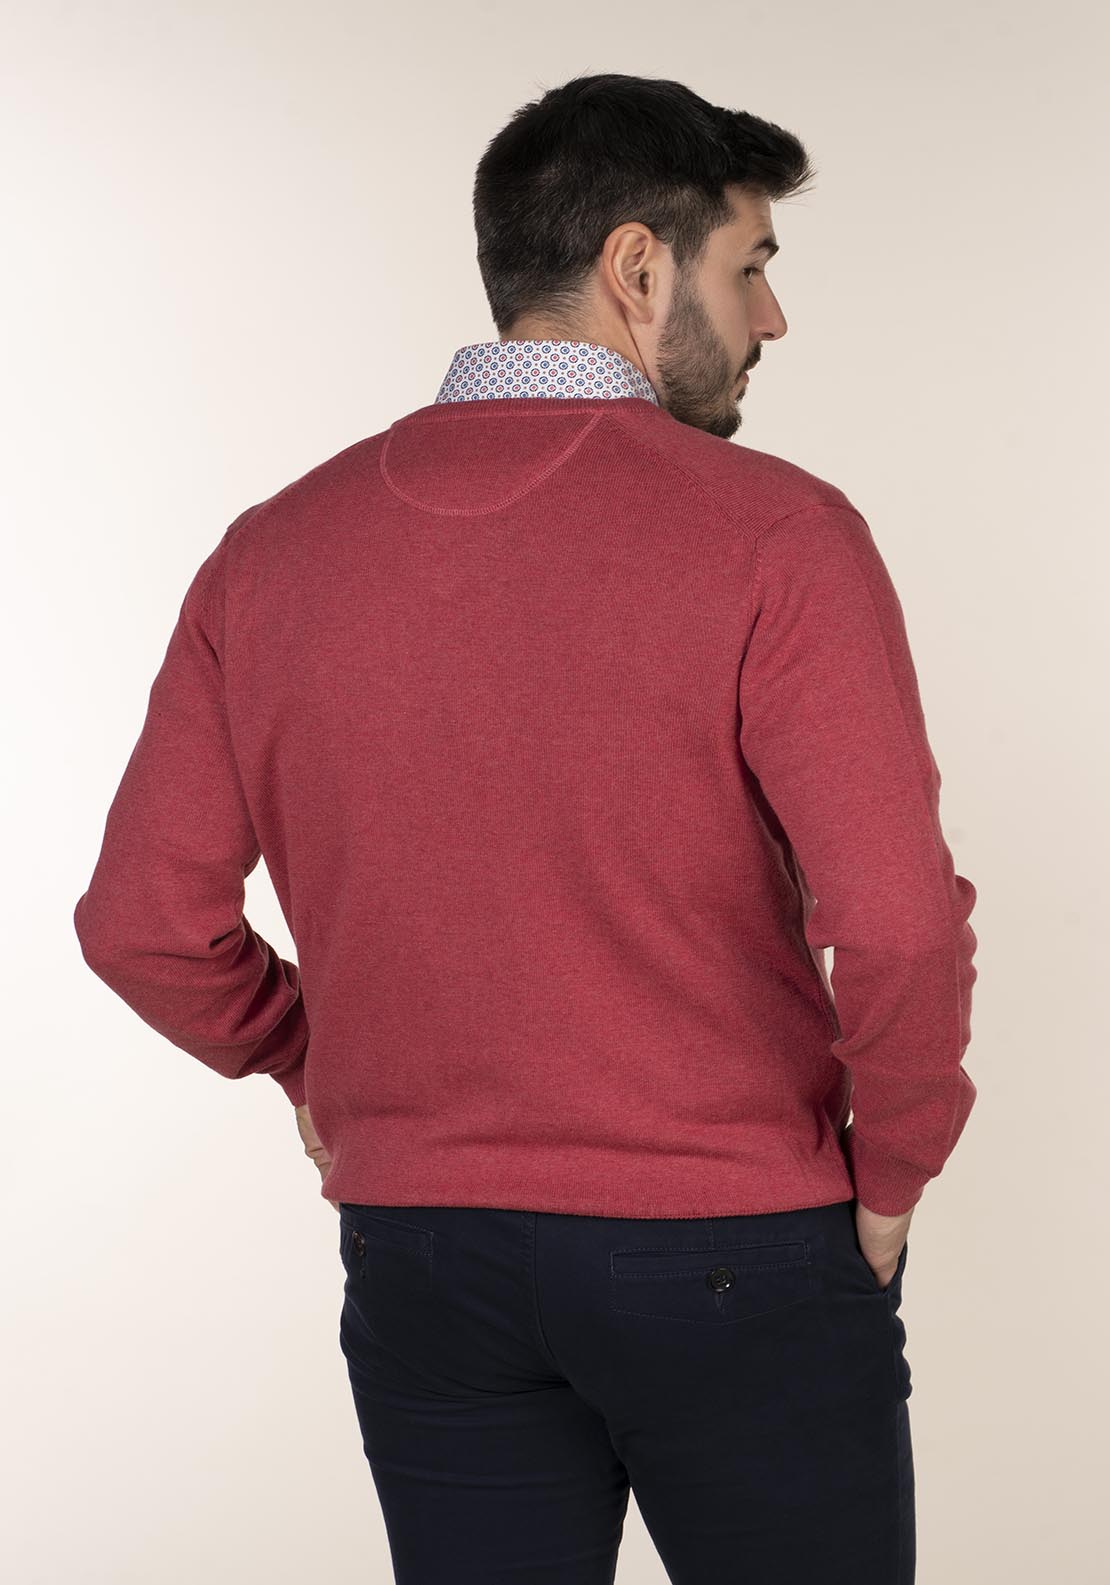 Yeats Plain Cotton V Neck Sweaters 4 Shaws Department Stores